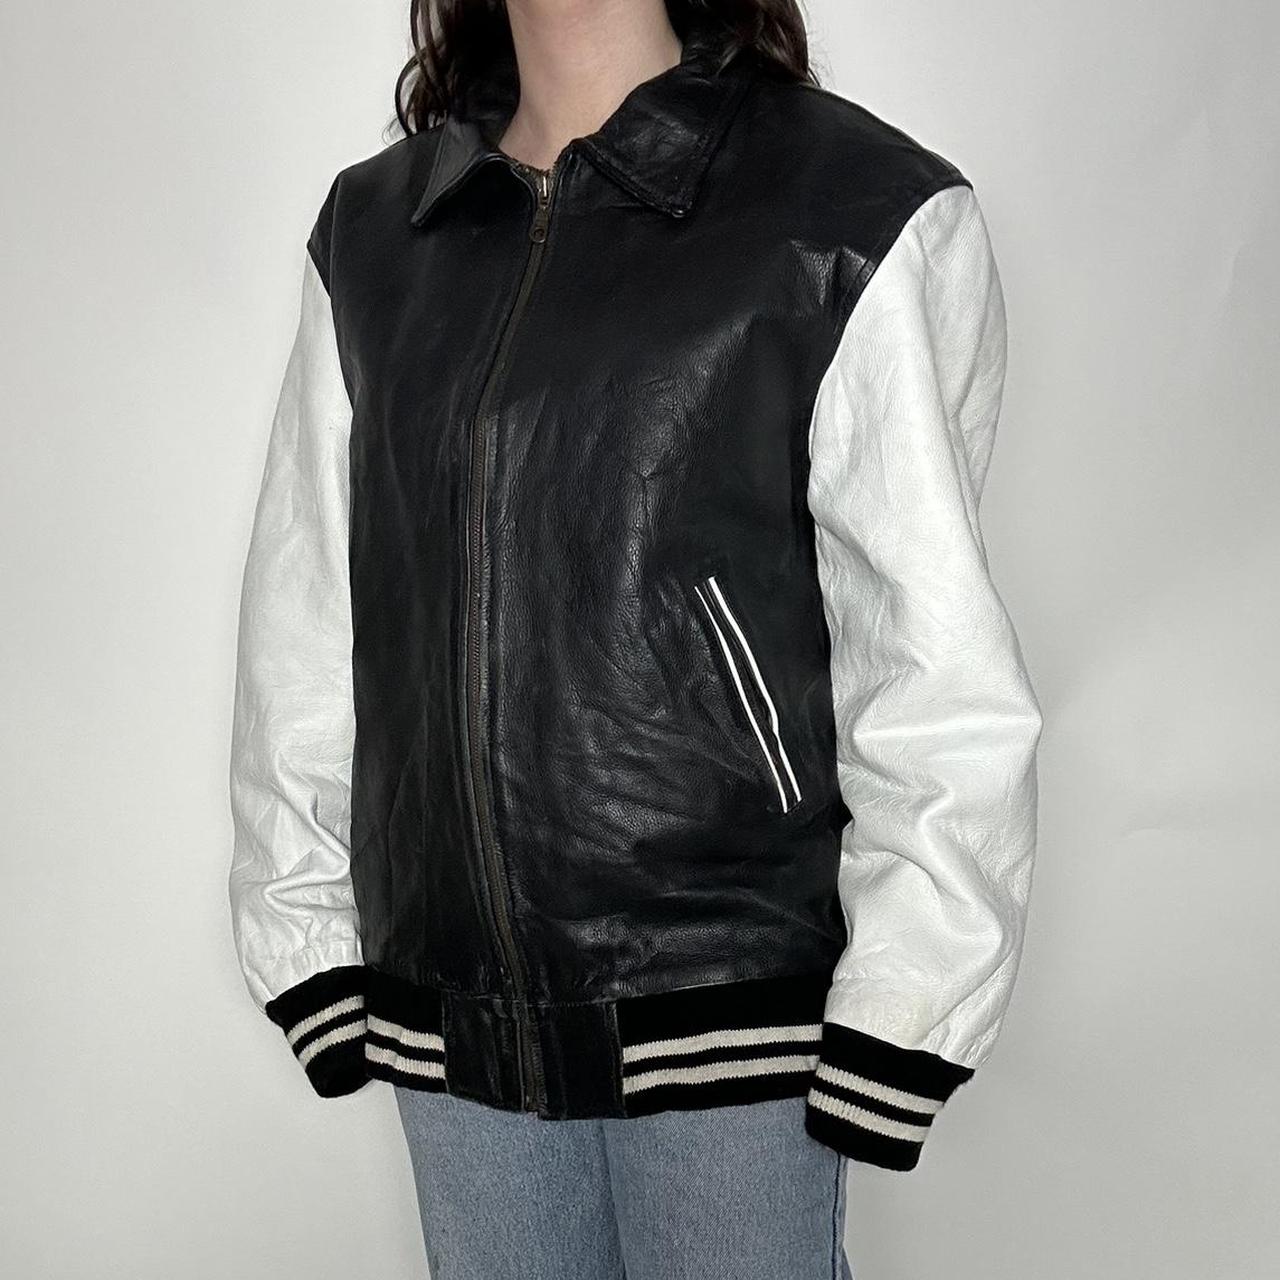 Vintage 90s leather bomber jacket with striped cuffs and collar and white sleeves